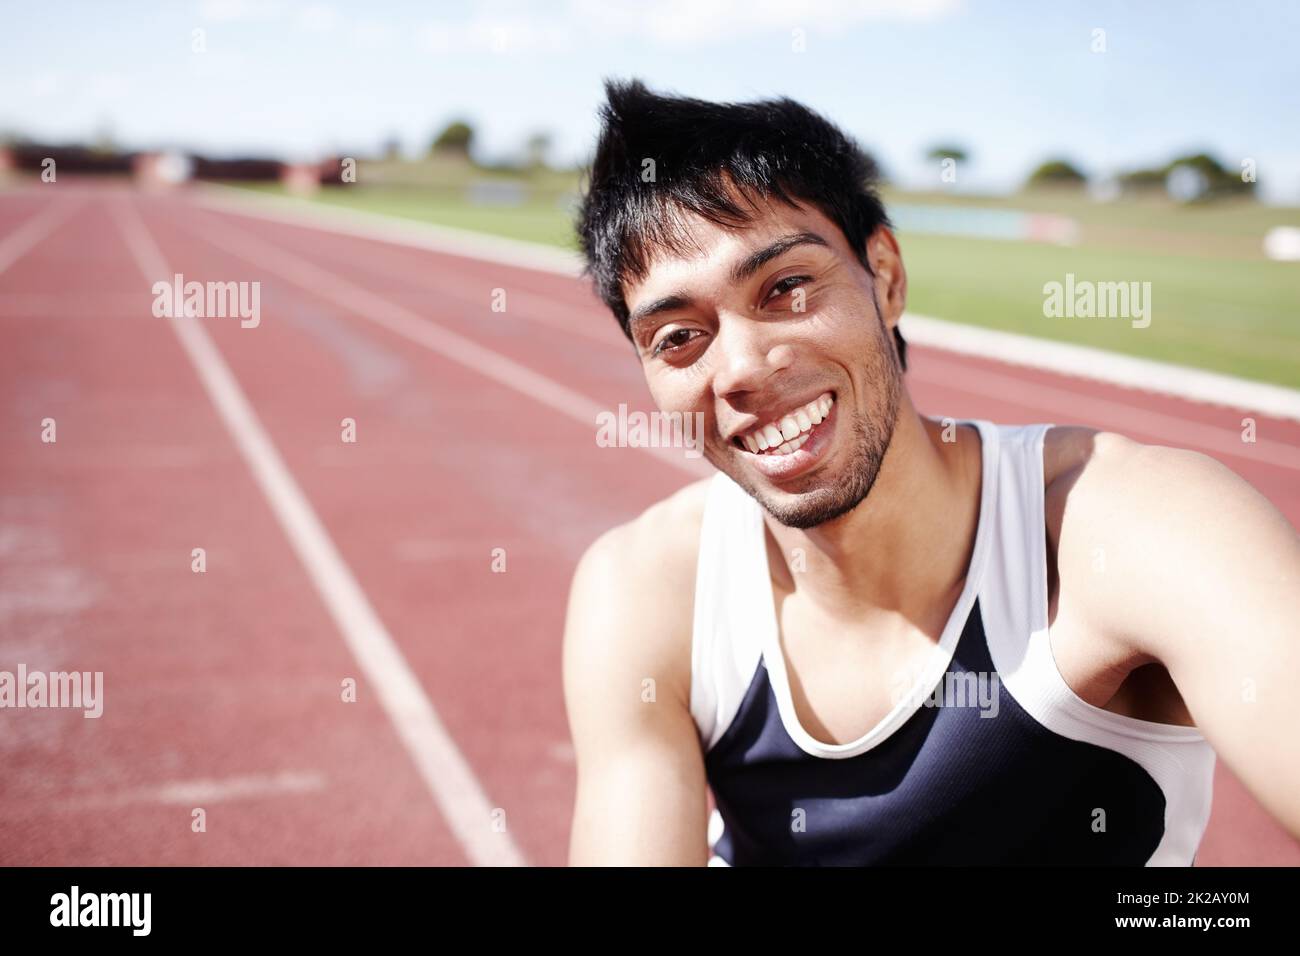 Hes got a winning smile. Portrait of a smiling young sportsman. Stock Photo